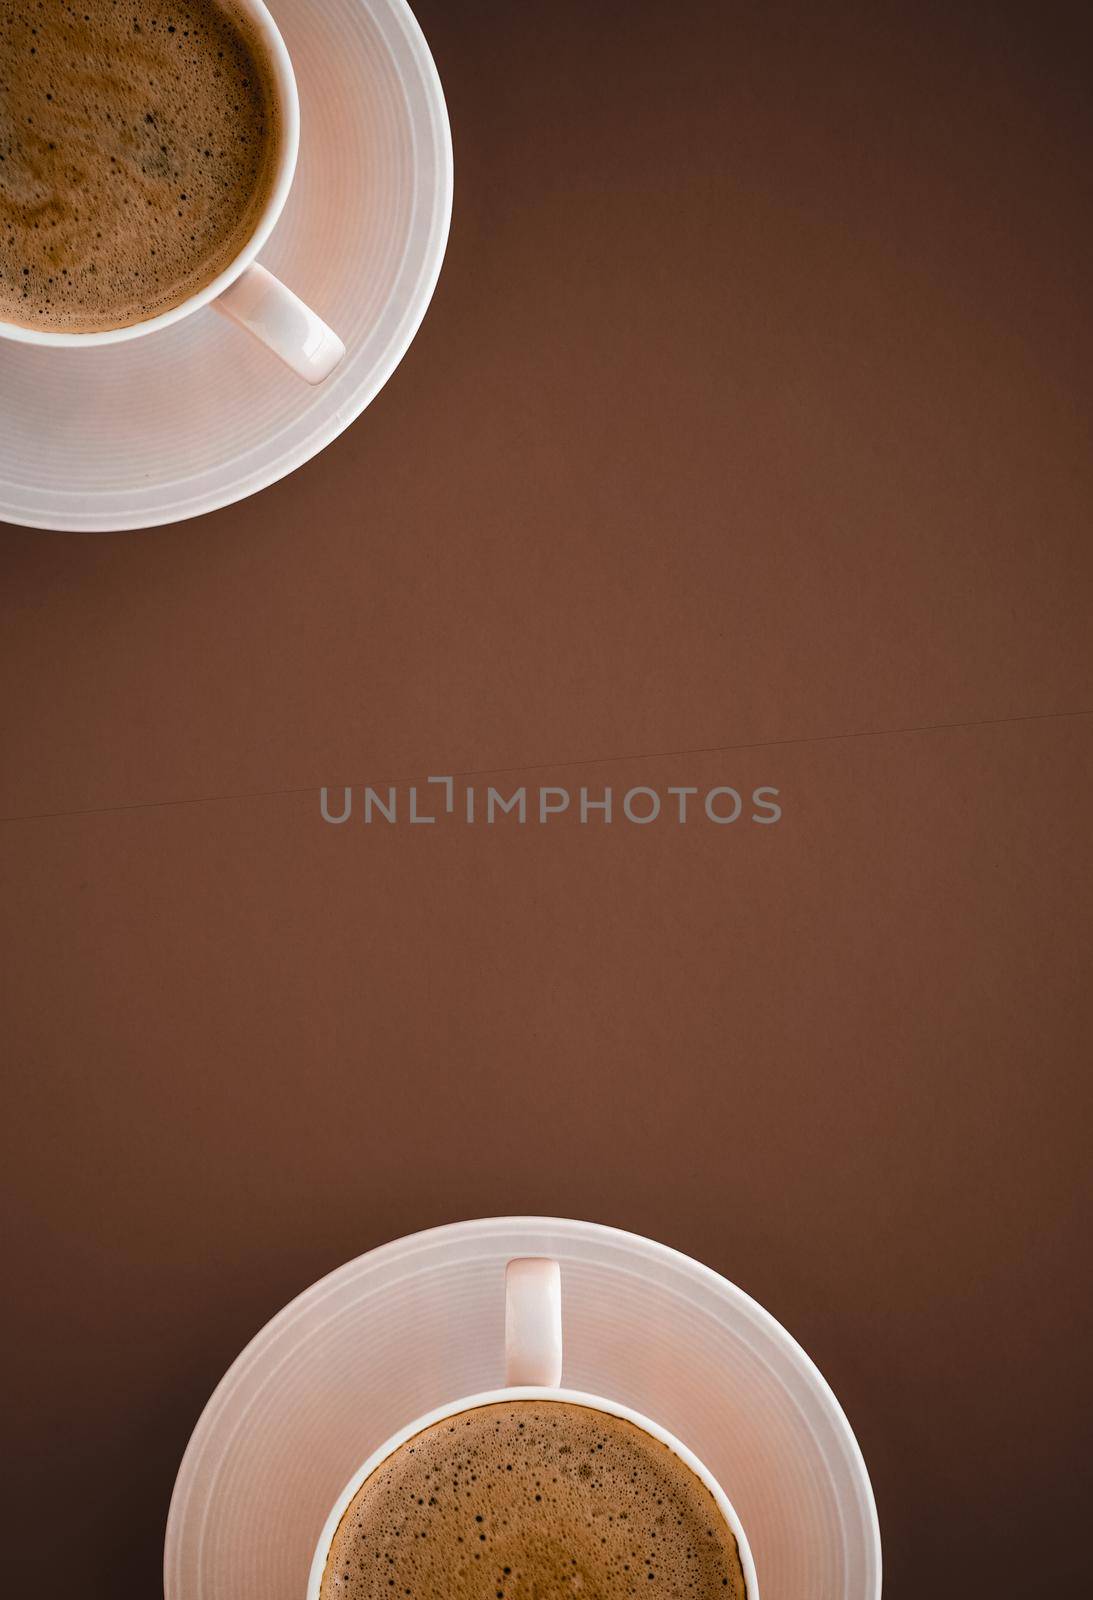 Drinks menu, italian espresso recipe and organic shop concept - Cup of hot coffee as breakfast drink, flatlay cups on brown background